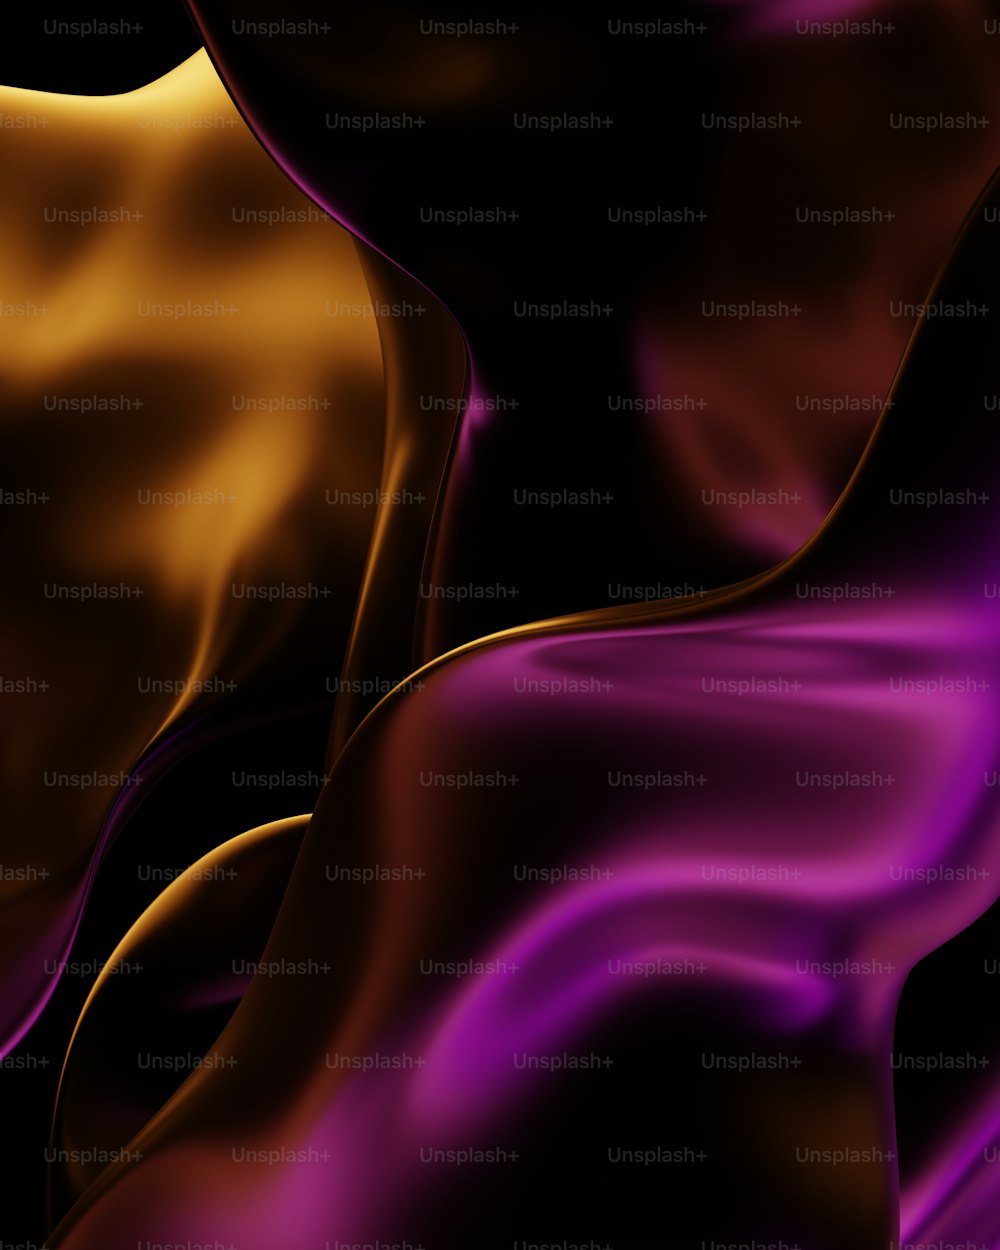 an abstract image of a purple and yellow background